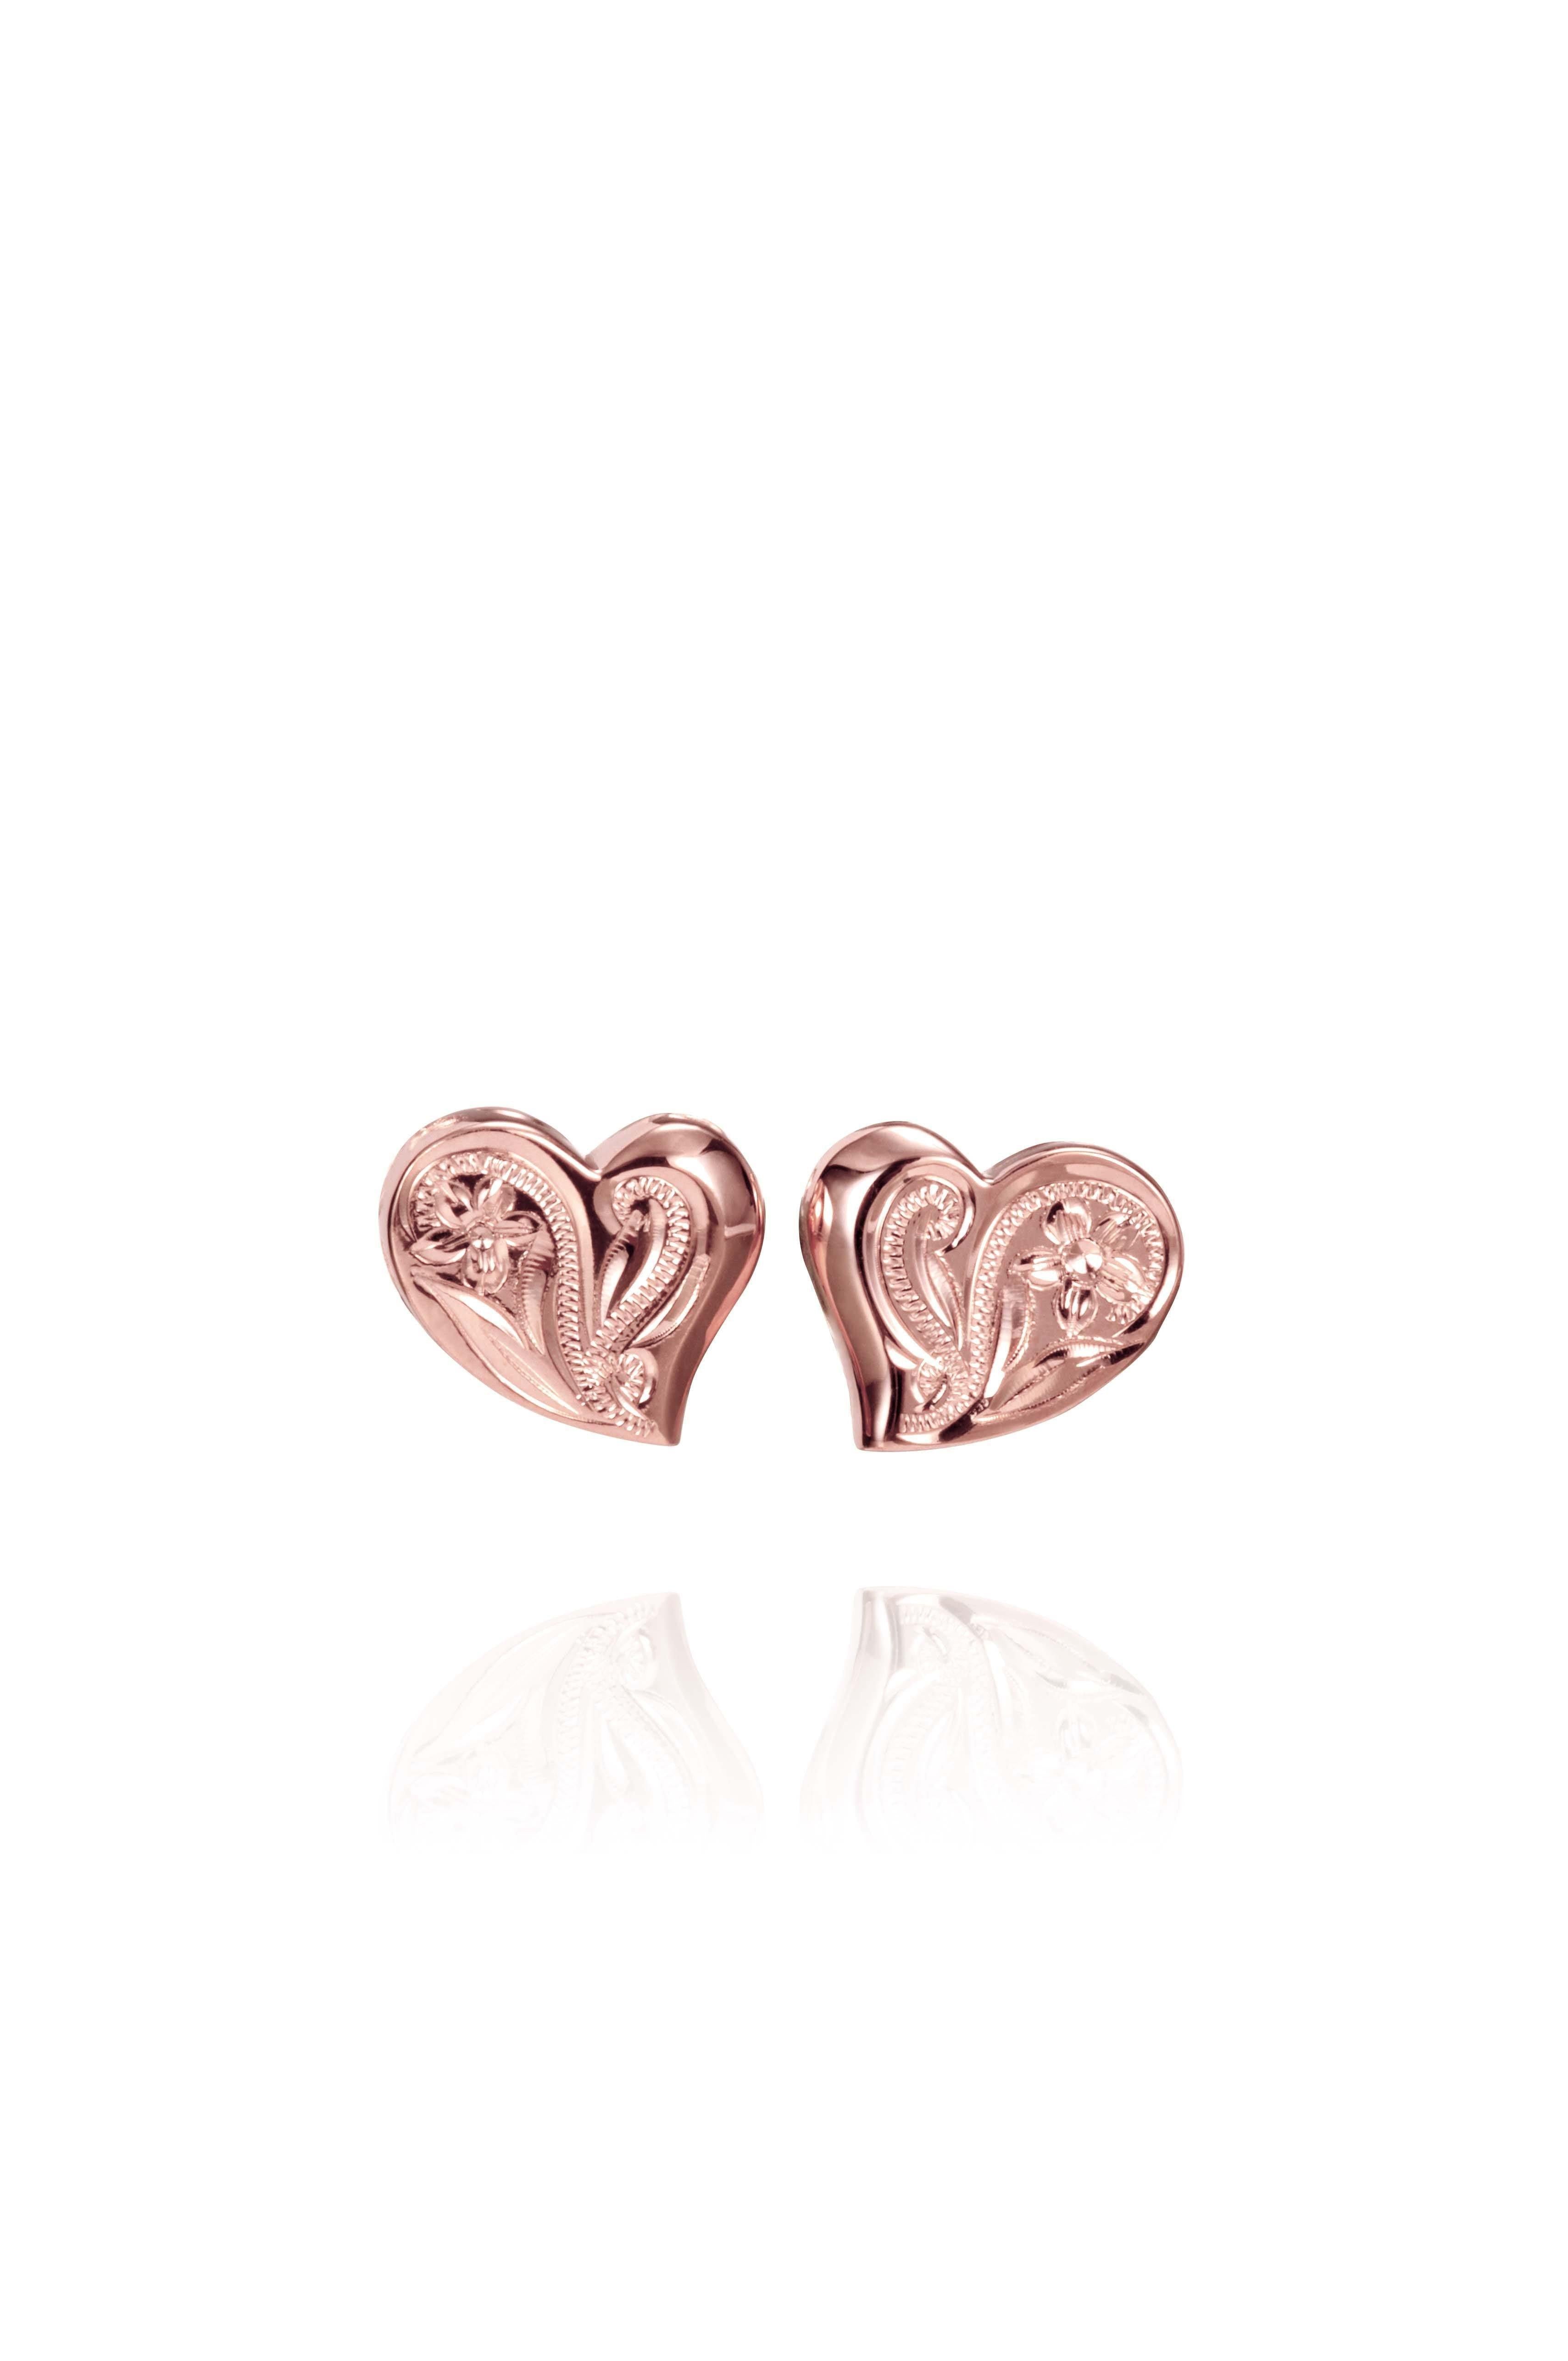 In this photo there is a pair of 14k rose gold heart stud earrings with plumeria flower engravings.